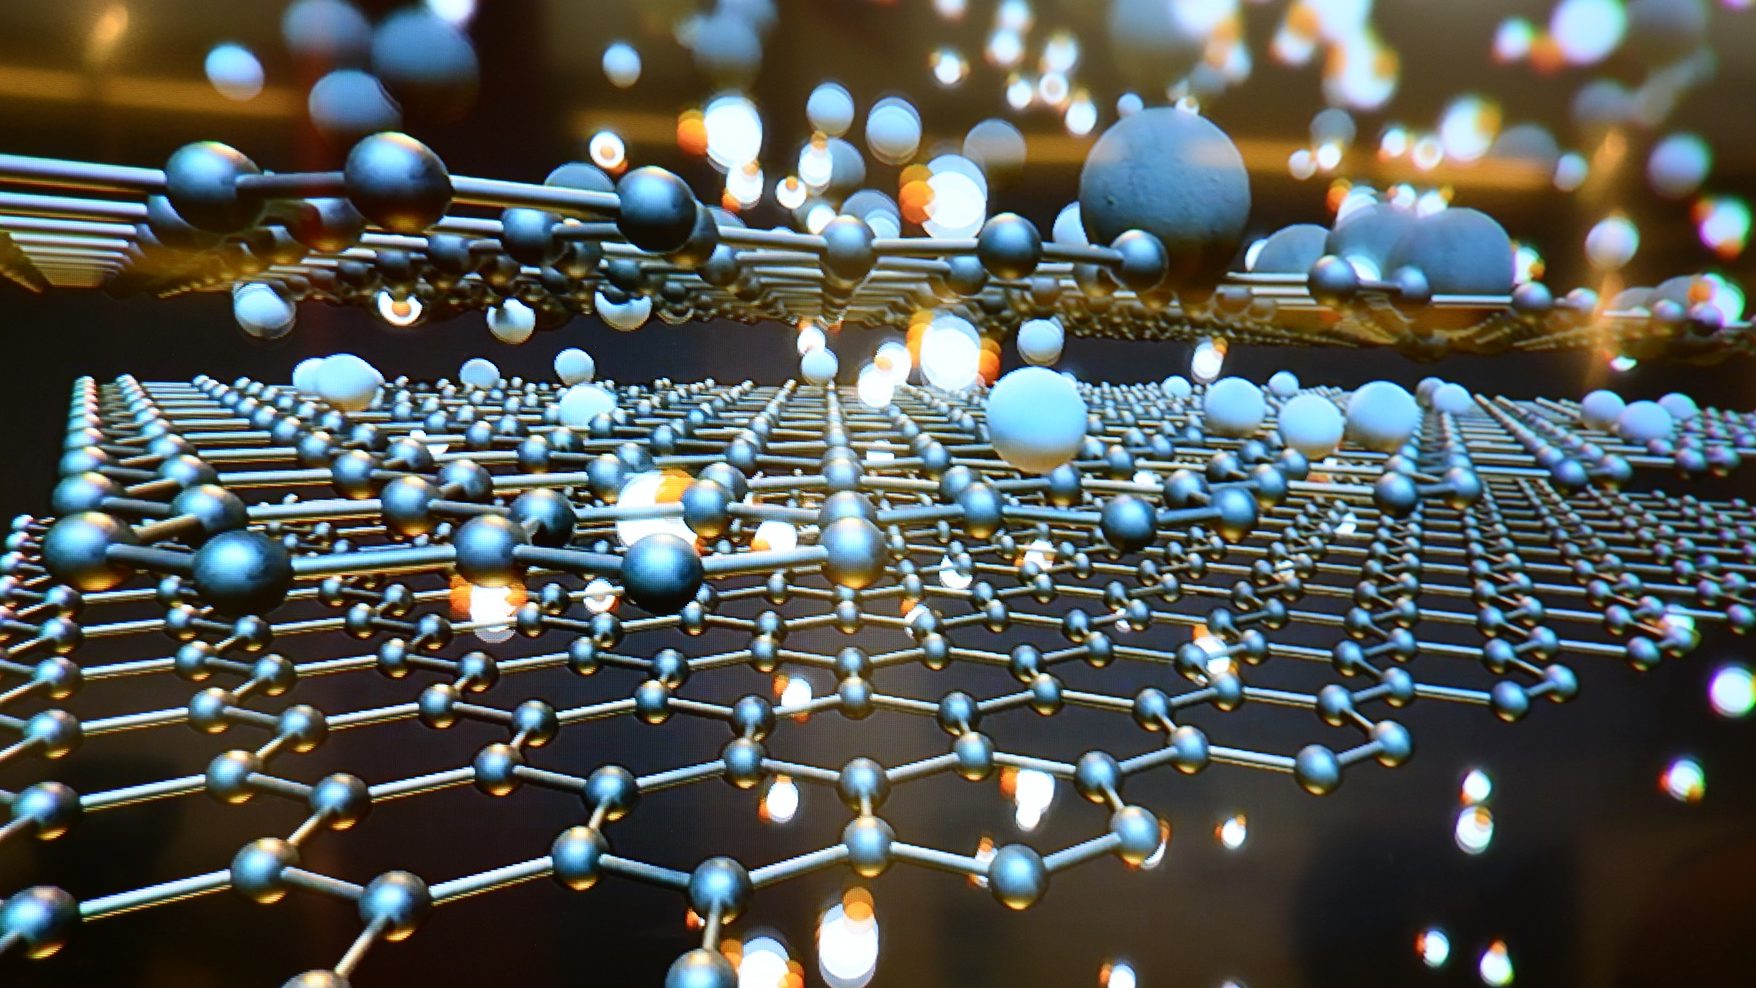 Graphene And 2-D Materials Market